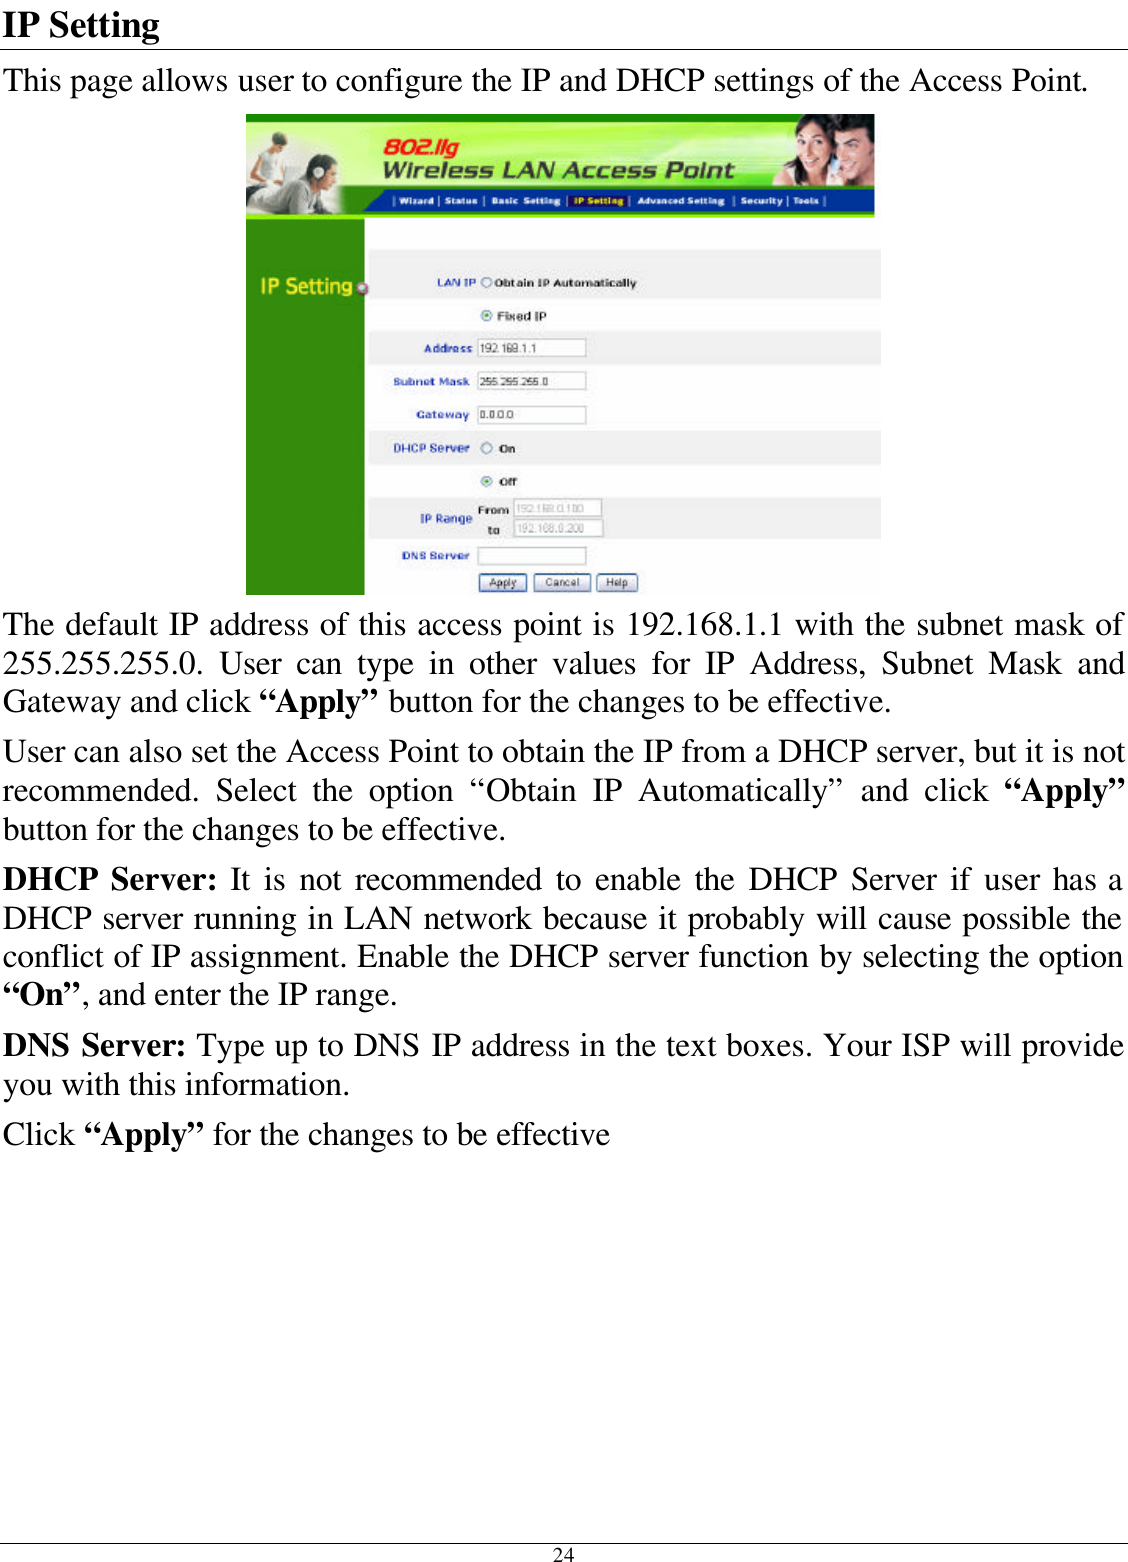 24 IP Setting This page allows user to configure the IP and DHCP settings of the Access Point.  The default IP address of this access point is 192.168.1.1 with the subnet mask of 255.255.255.0.  User can type in other values for IP Address, Subnet Mask and Gateway and click “Apply” button for the changes to be effective.  User can also set the Access Point to obtain the IP from a DHCP server, but it is not recommended. Select the option “Obtain IP Automatically” and click “Apply” button for the changes to be effective. DHCP Server: It is not recommended to enable the DHCP Server if user has a DHCP server running in LAN network because it probably will cause possible the conflict of IP assignment. Enable the DHCP server function by selecting the option “On”, and enter the IP range. DNS Server: Type up to DNS IP address in the text boxes. Your ISP will provide you with this information. Click “Apply” for the changes to be effective 